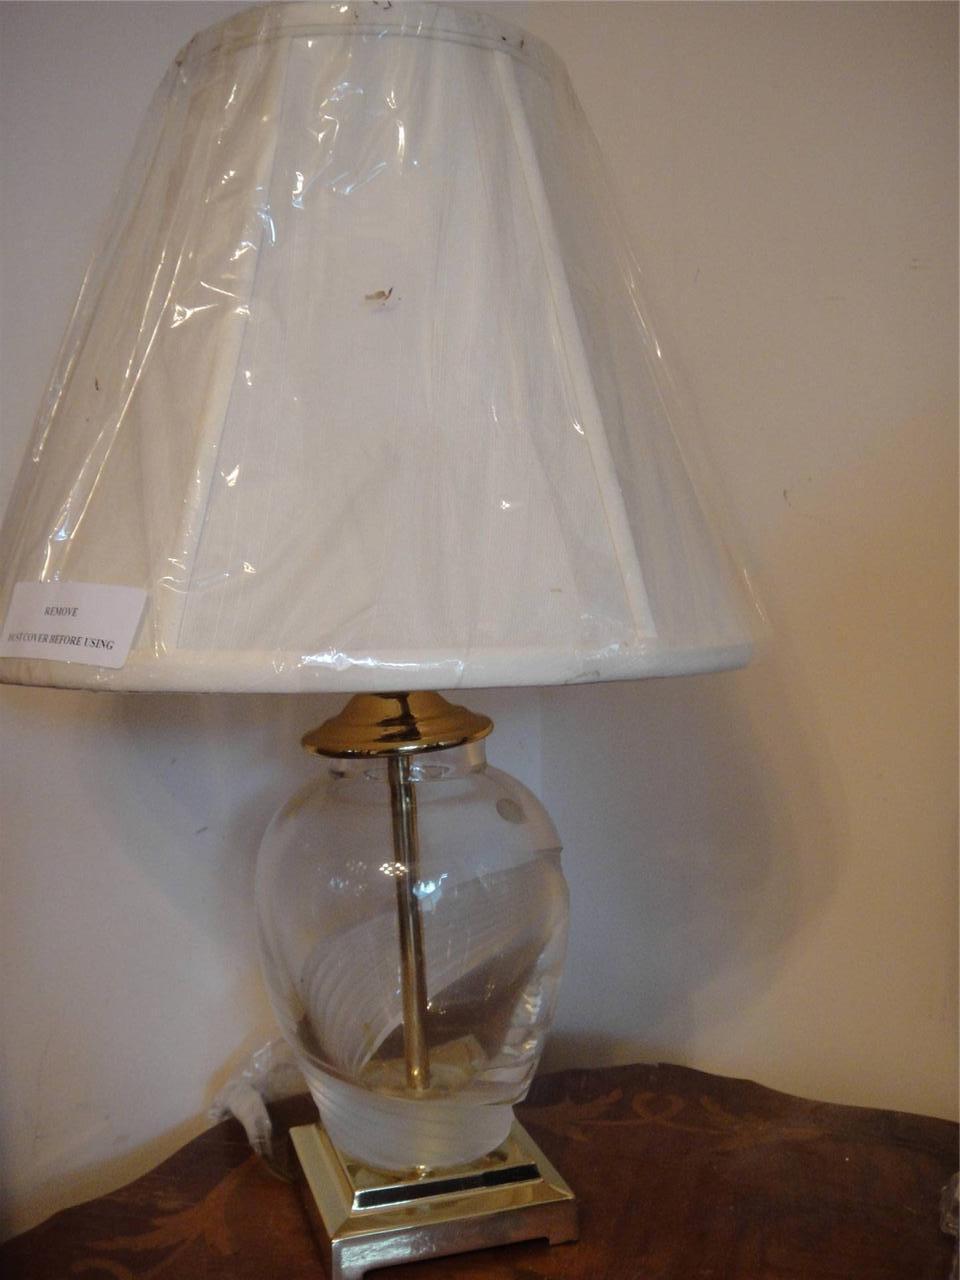 Retired Lenox Collectible Windswept Signed Crystal Lamp New in box $1014